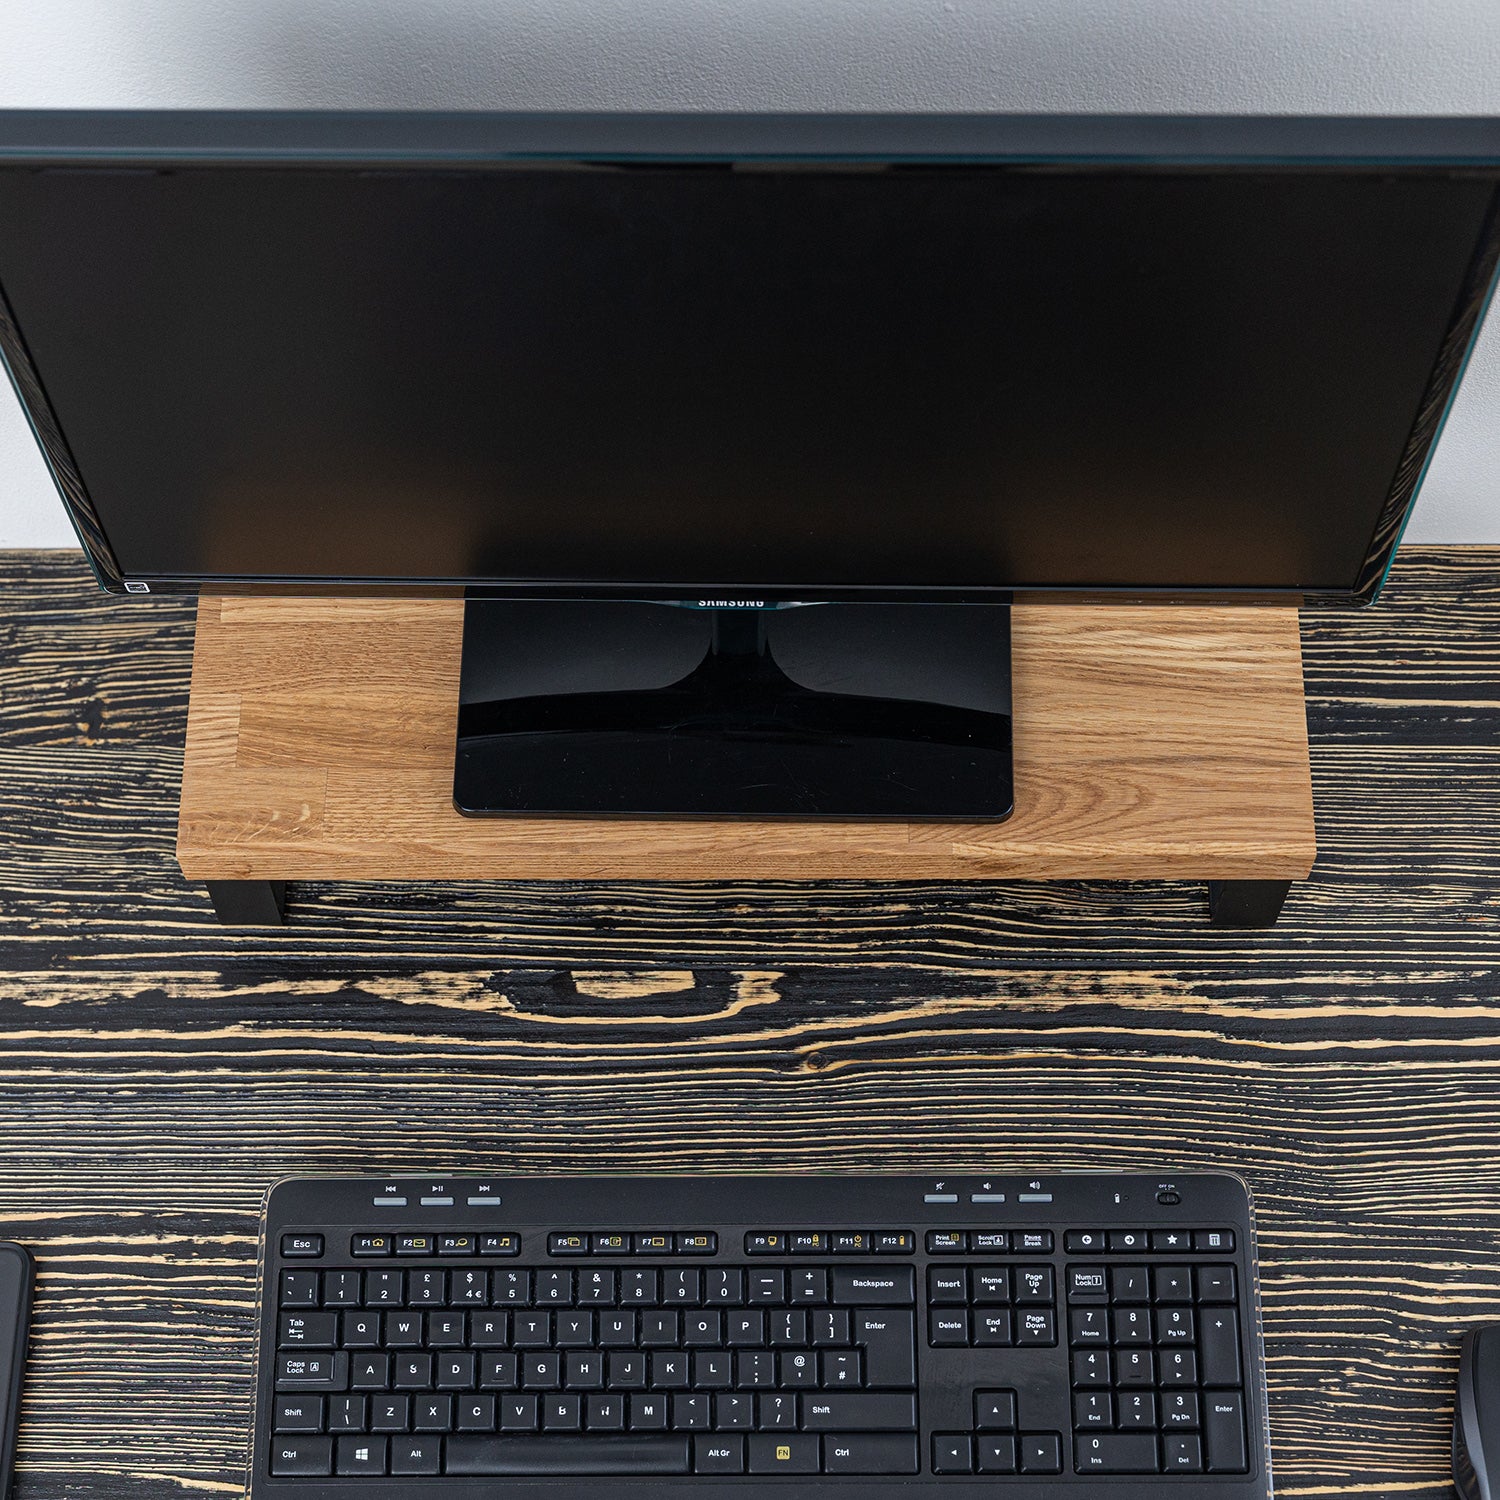 Dark Wood Electric Height Adjustable Standing Desk with Oak Monitor Stand